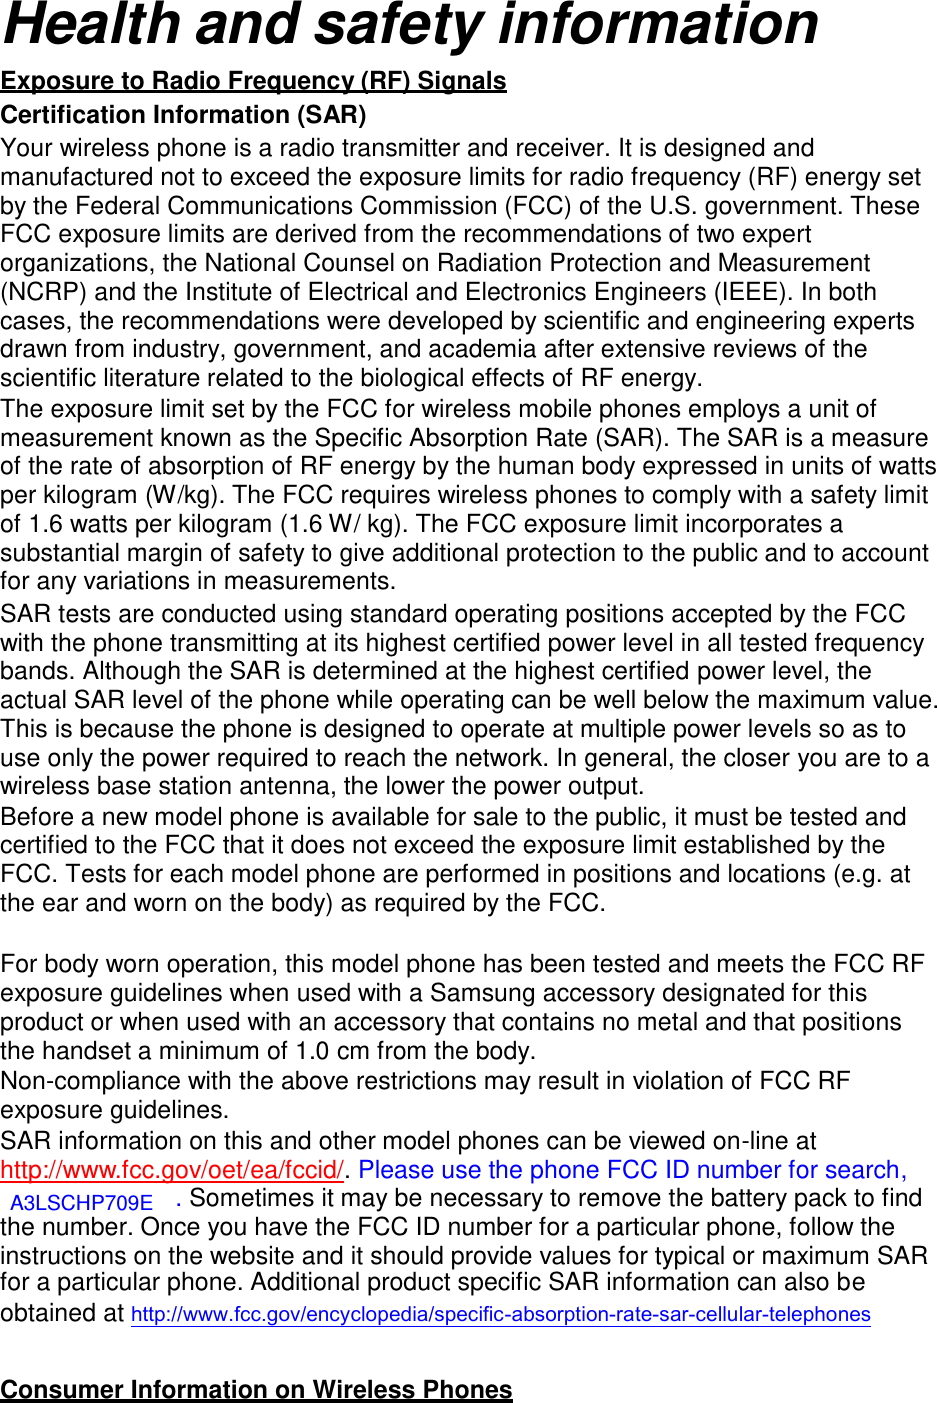  Health and safety information  Exposure to Radio Frequency (RF) Signals Certification Information (SAR) Your wireless phone is a radio transmitter and receiver. It is designed and manufactured not to exceed the exposure limits for radio frequency (RF) energy set by the Federal Communications Commission (FCC) of the U.S. government. These FCC exposure limits are derived from the recommendations of two expert organizations, the National Counsel on Radiation Protection and Measurement (NCRP) and the Institute of Electrical and Electronics Engineers (IEEE). In both cases, the recommendations were developed by scientific and engineering experts drawn from industry, government, and academia after extensive reviews of the scientific literature related to the biological effects of RF energy. The exposure limit set by the FCC for wireless mobile phones employs a unit of measurement known as the Specific Absorption Rate (SAR). The SAR is a measure of the rate of absorption of RF energy by the human body expressed in units of watts per kilogram (W/kg). The FCC requires wireless phones to comply with a safety limit of 1.6 watts per kilogram (1.6 W/ kg). The FCC exposure limit incorporates a substantial margin of safety to give additional protection to the public and to account for any variations in measurements. SAR tests are conducted using standard operating positions accepted by the FCC with the phone transmitting at its highest certified power level in all tested frequency bands. Although the SAR is determined at the highest certified power level, the actual SAR level of the phone while operating can be well below the maximum value. This is because the phone is designed to operate at multiple power levels so as to use only the power required to reach the network. In general, the closer you are to a wireless base station antenna, the lower the power output. Before a new model phone is available for sale to the public, it must be tested and certified to the FCC that it does not exceed the exposure limit established by the FCC. Tests for each model phone are performed in positions and locations (e.g. at the ear and worn on the body) as required by the FCC.   For body worn operation, this model phone has been tested and meets the FCC RF exposure guidelines when used with a Samsung accessory designated for this product or when used with an accessory that contains no metal and that positions the handset a minimum of 1.0 cm from the body. Non-compliance with the above restrictions may result in violation of FCC RF exposure guidelines. SAR information on this and other model phones can be viewed on-line at http://www.fcc.gov/oet/ea/fccid/. Please use the phone FCC ID number for search, A3LSCHP709E . Sometimes it may be necessary to remove the battery pack to find the number. Once you have the FCC ID number for a particular phone, follow the instructions on the website and it should provide values for typical or maximum SAR for a particular phone. Additional product specific SAR information can also be obtained at http://www.fcc.gov/encyclopedia/specific-absorption-rate-sar-cellular-telephones   Consumer Information on Wireless Phones 